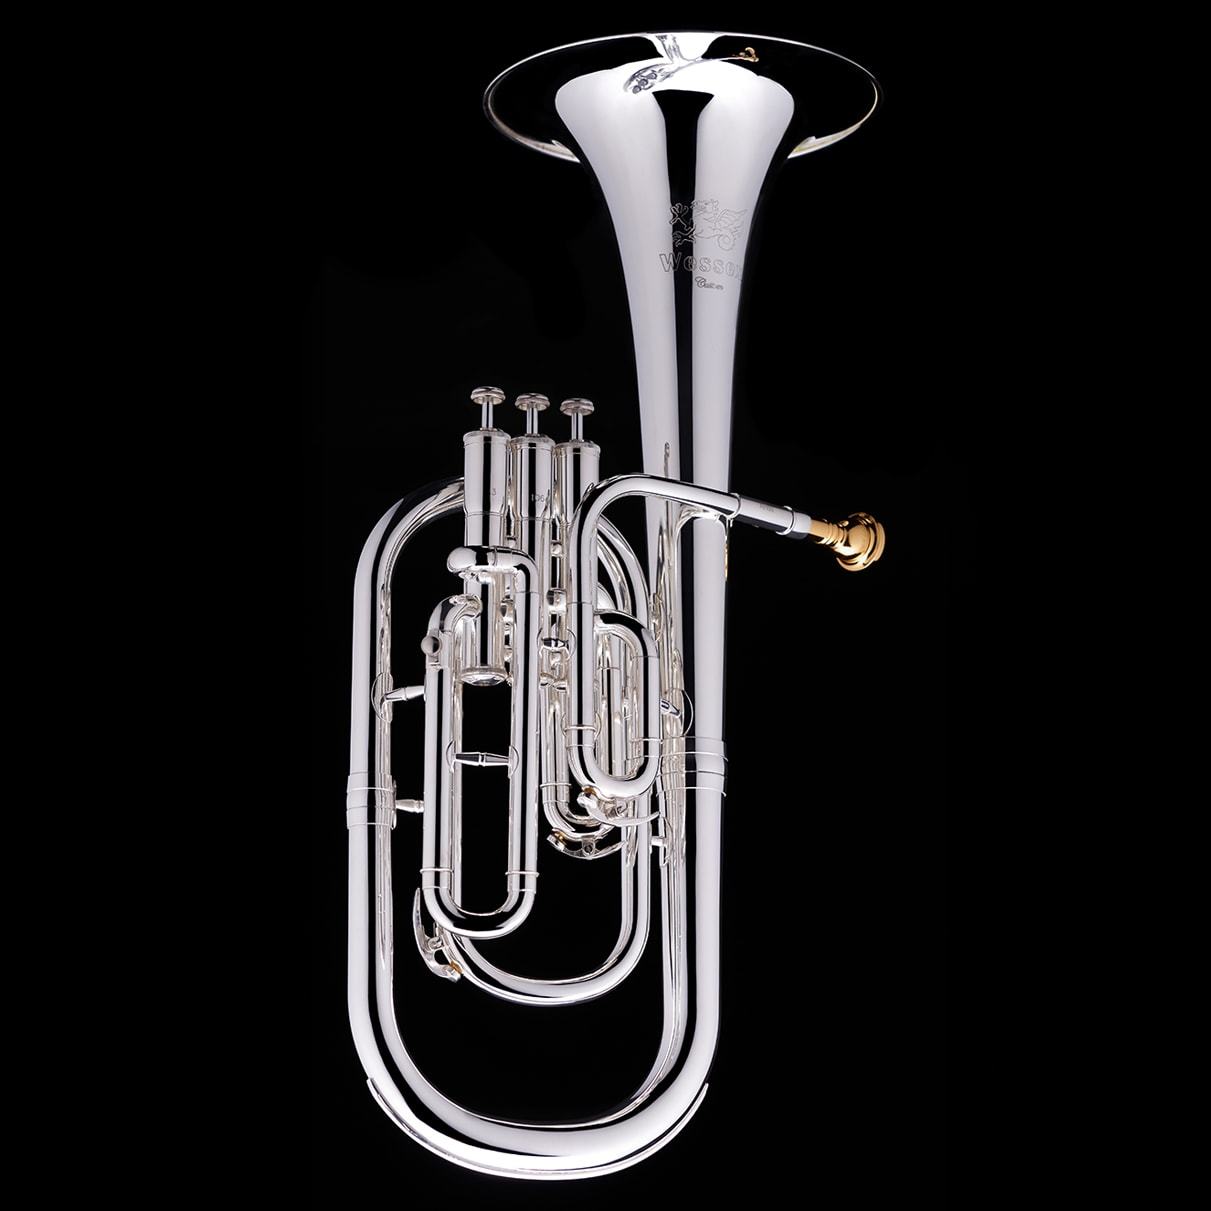 An alternative image of a Eb Tenor/Alto Horn from Wessex Tubas